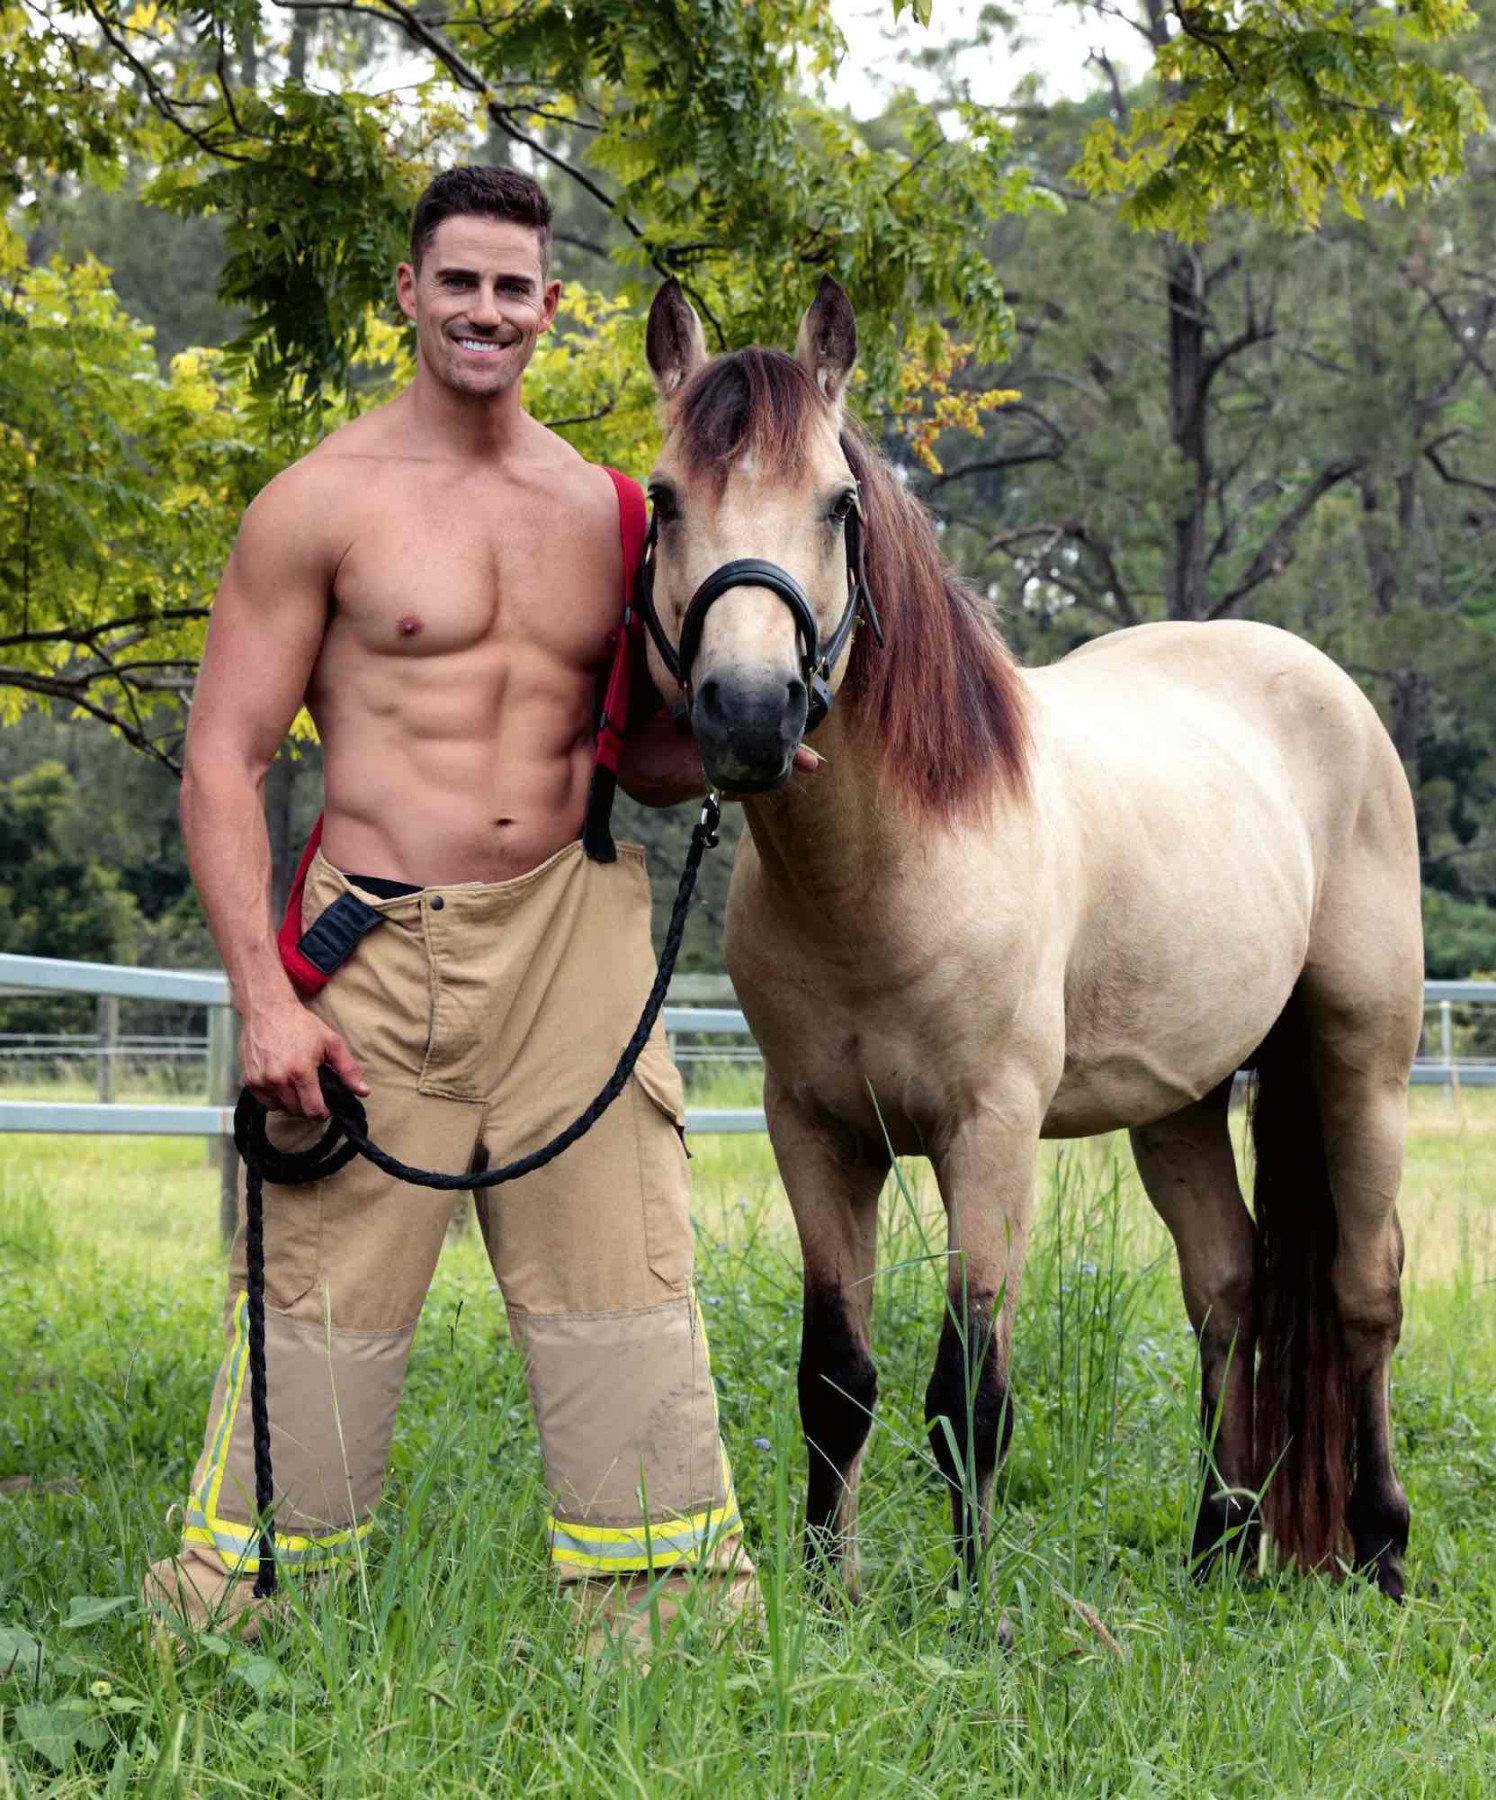 Australia Firefighters Pose With Cute Animals for Sexy